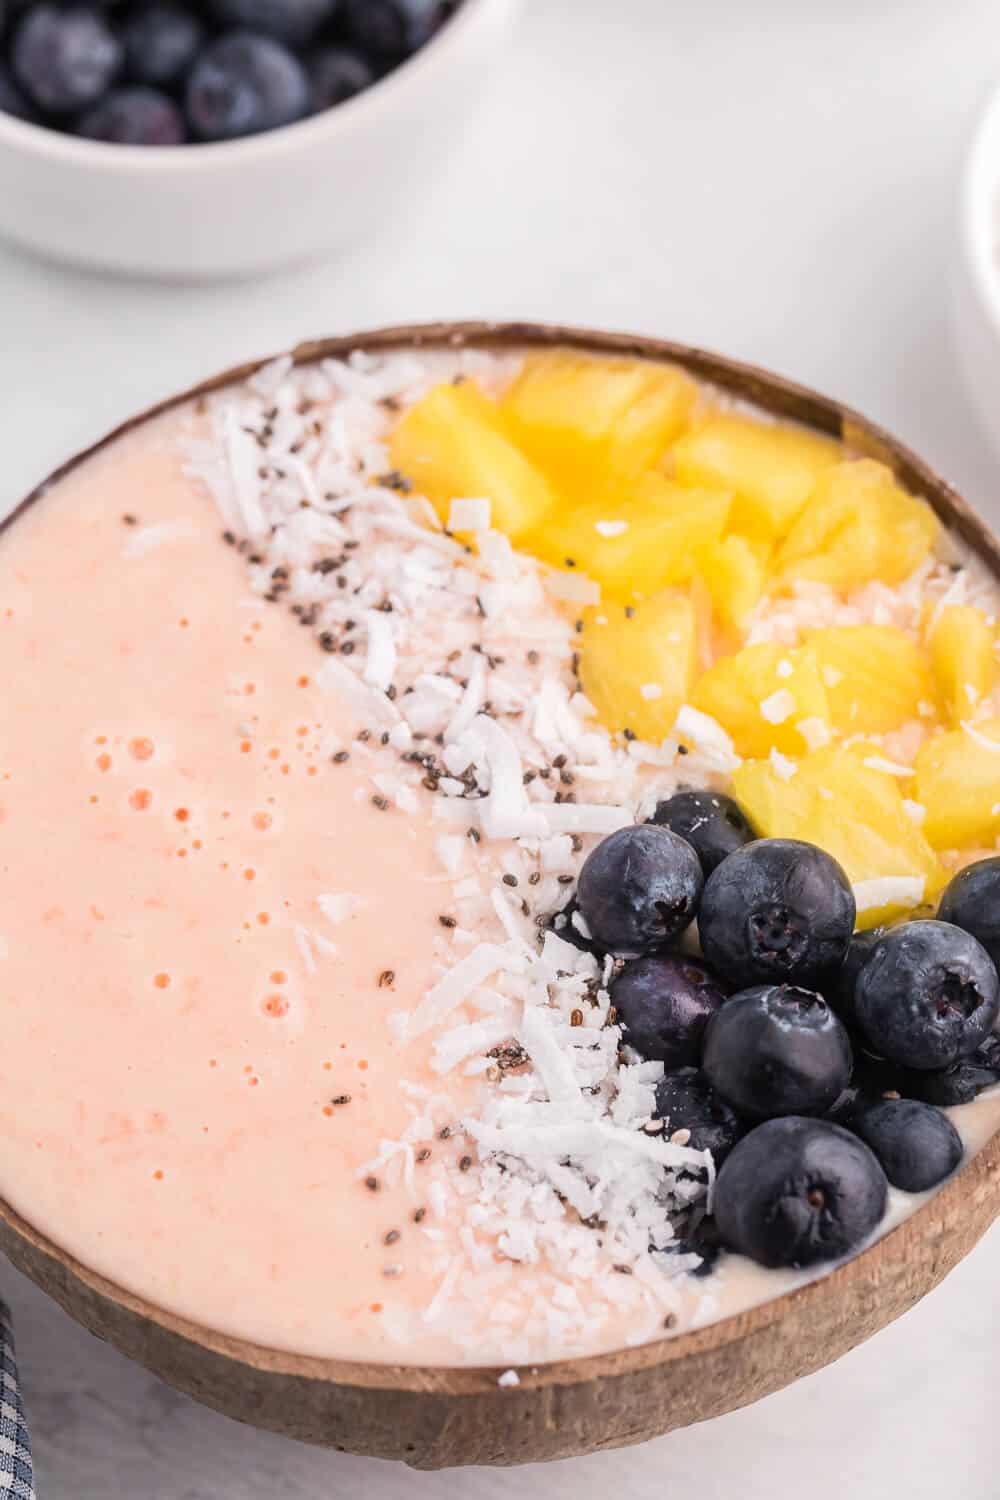 Grapefruit Smoothie Bowl - This easy smoothie bowl recipe is healthy and naturally sweet way to kickstart your mornings. It's made with creamy blend of Sweet Scarletts Texas Red Grapefruit, Greek Yogurt, pineapple and a banana. Top it with some fresh blueberries, seeds and coconut. Yum!